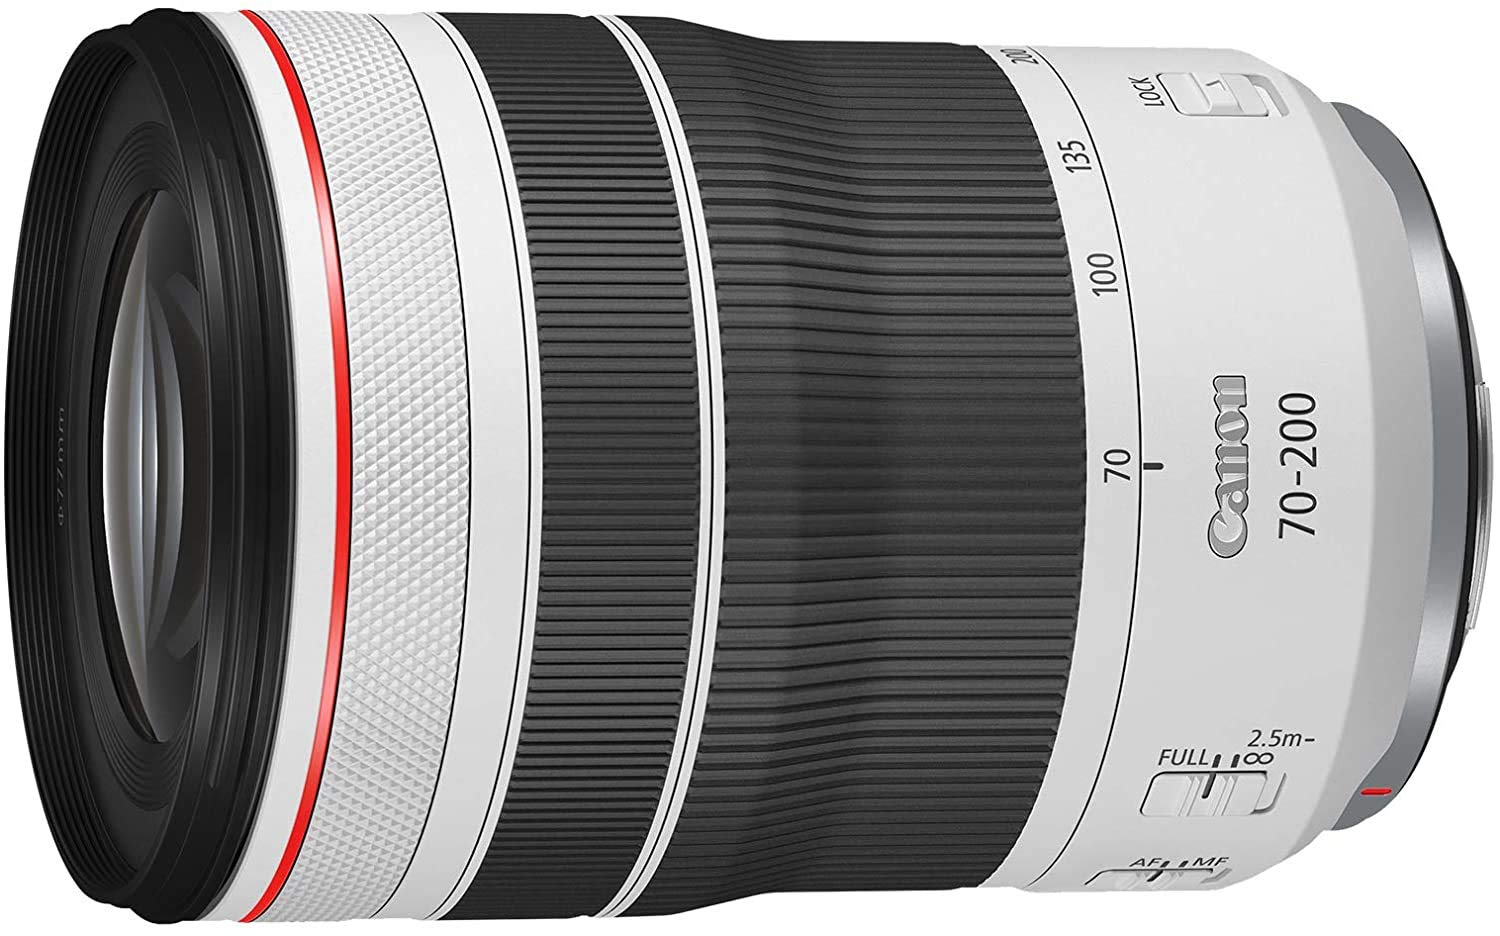 Canon RF70-200mm F4 L is USM (4318C002)